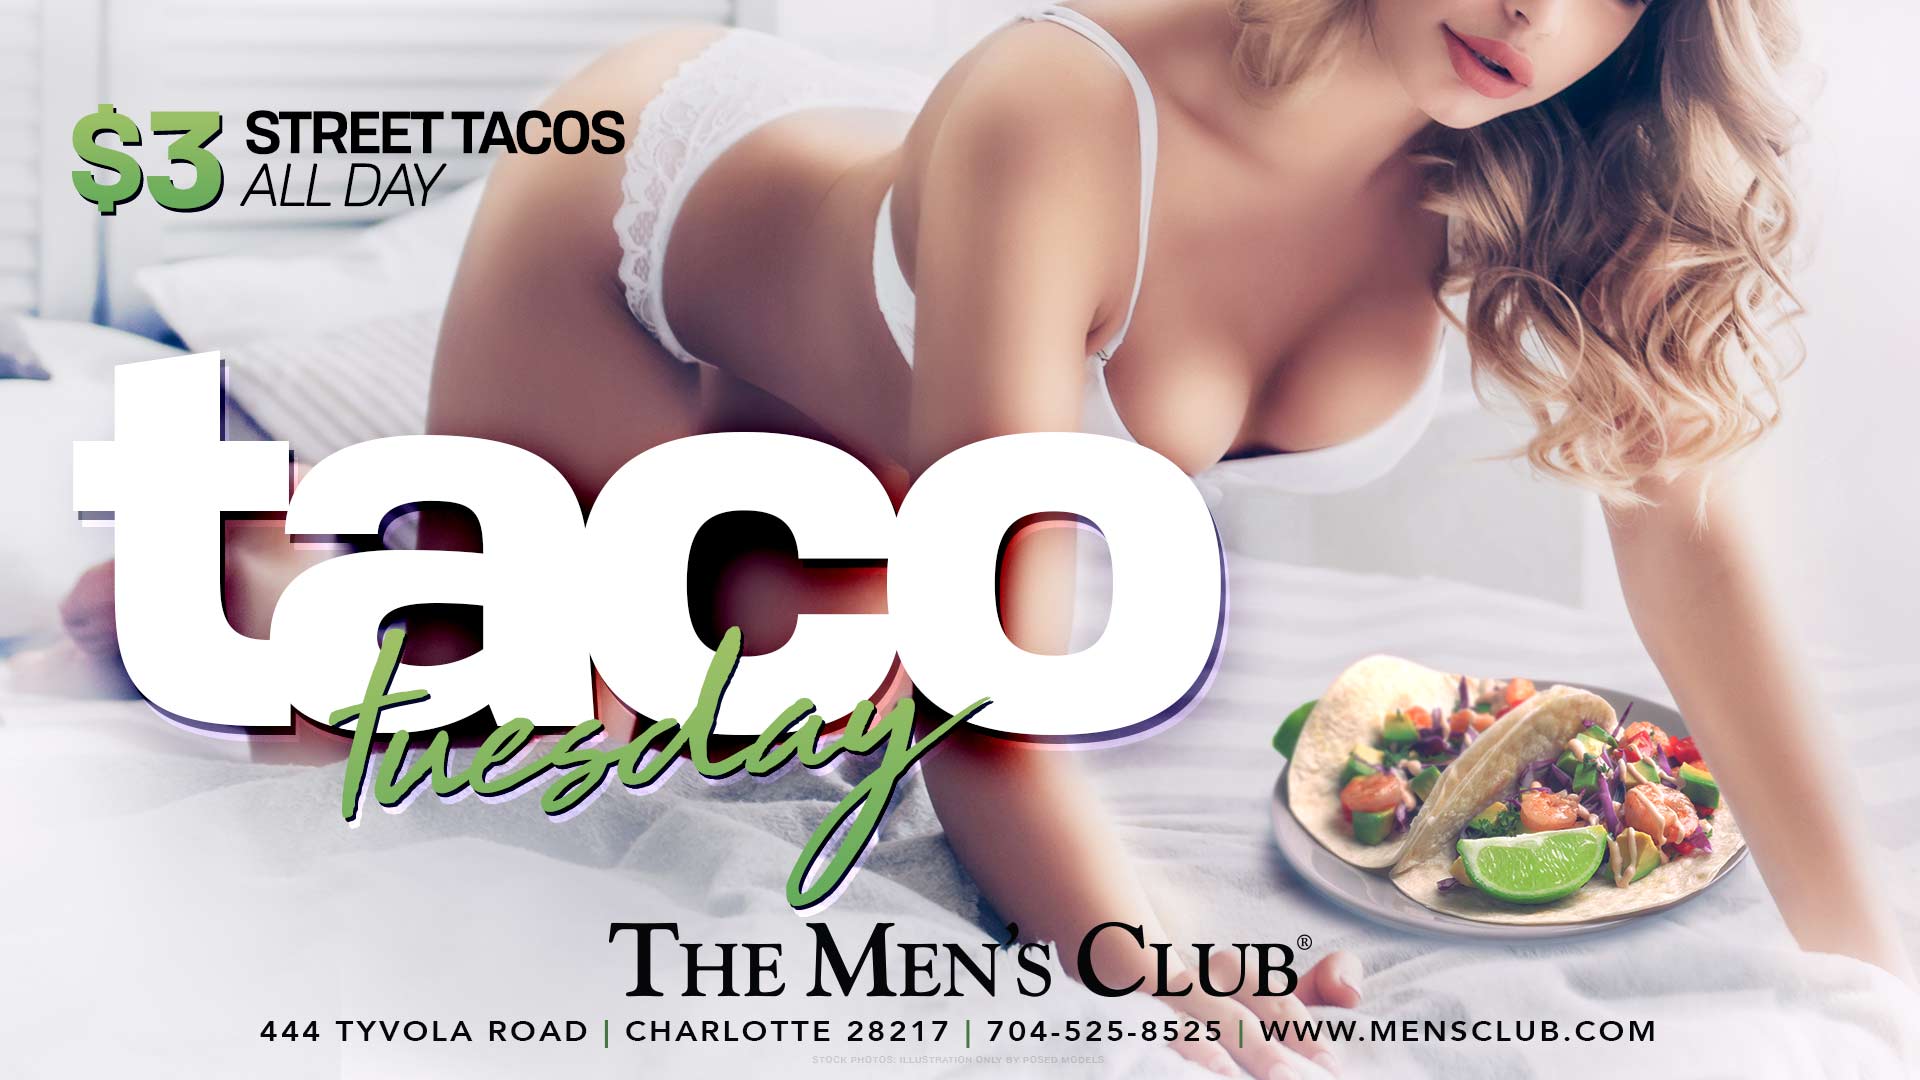 image of sexy woman leaning over plate of tacos for Taco Tuesday at The Men's Club of Charlotte